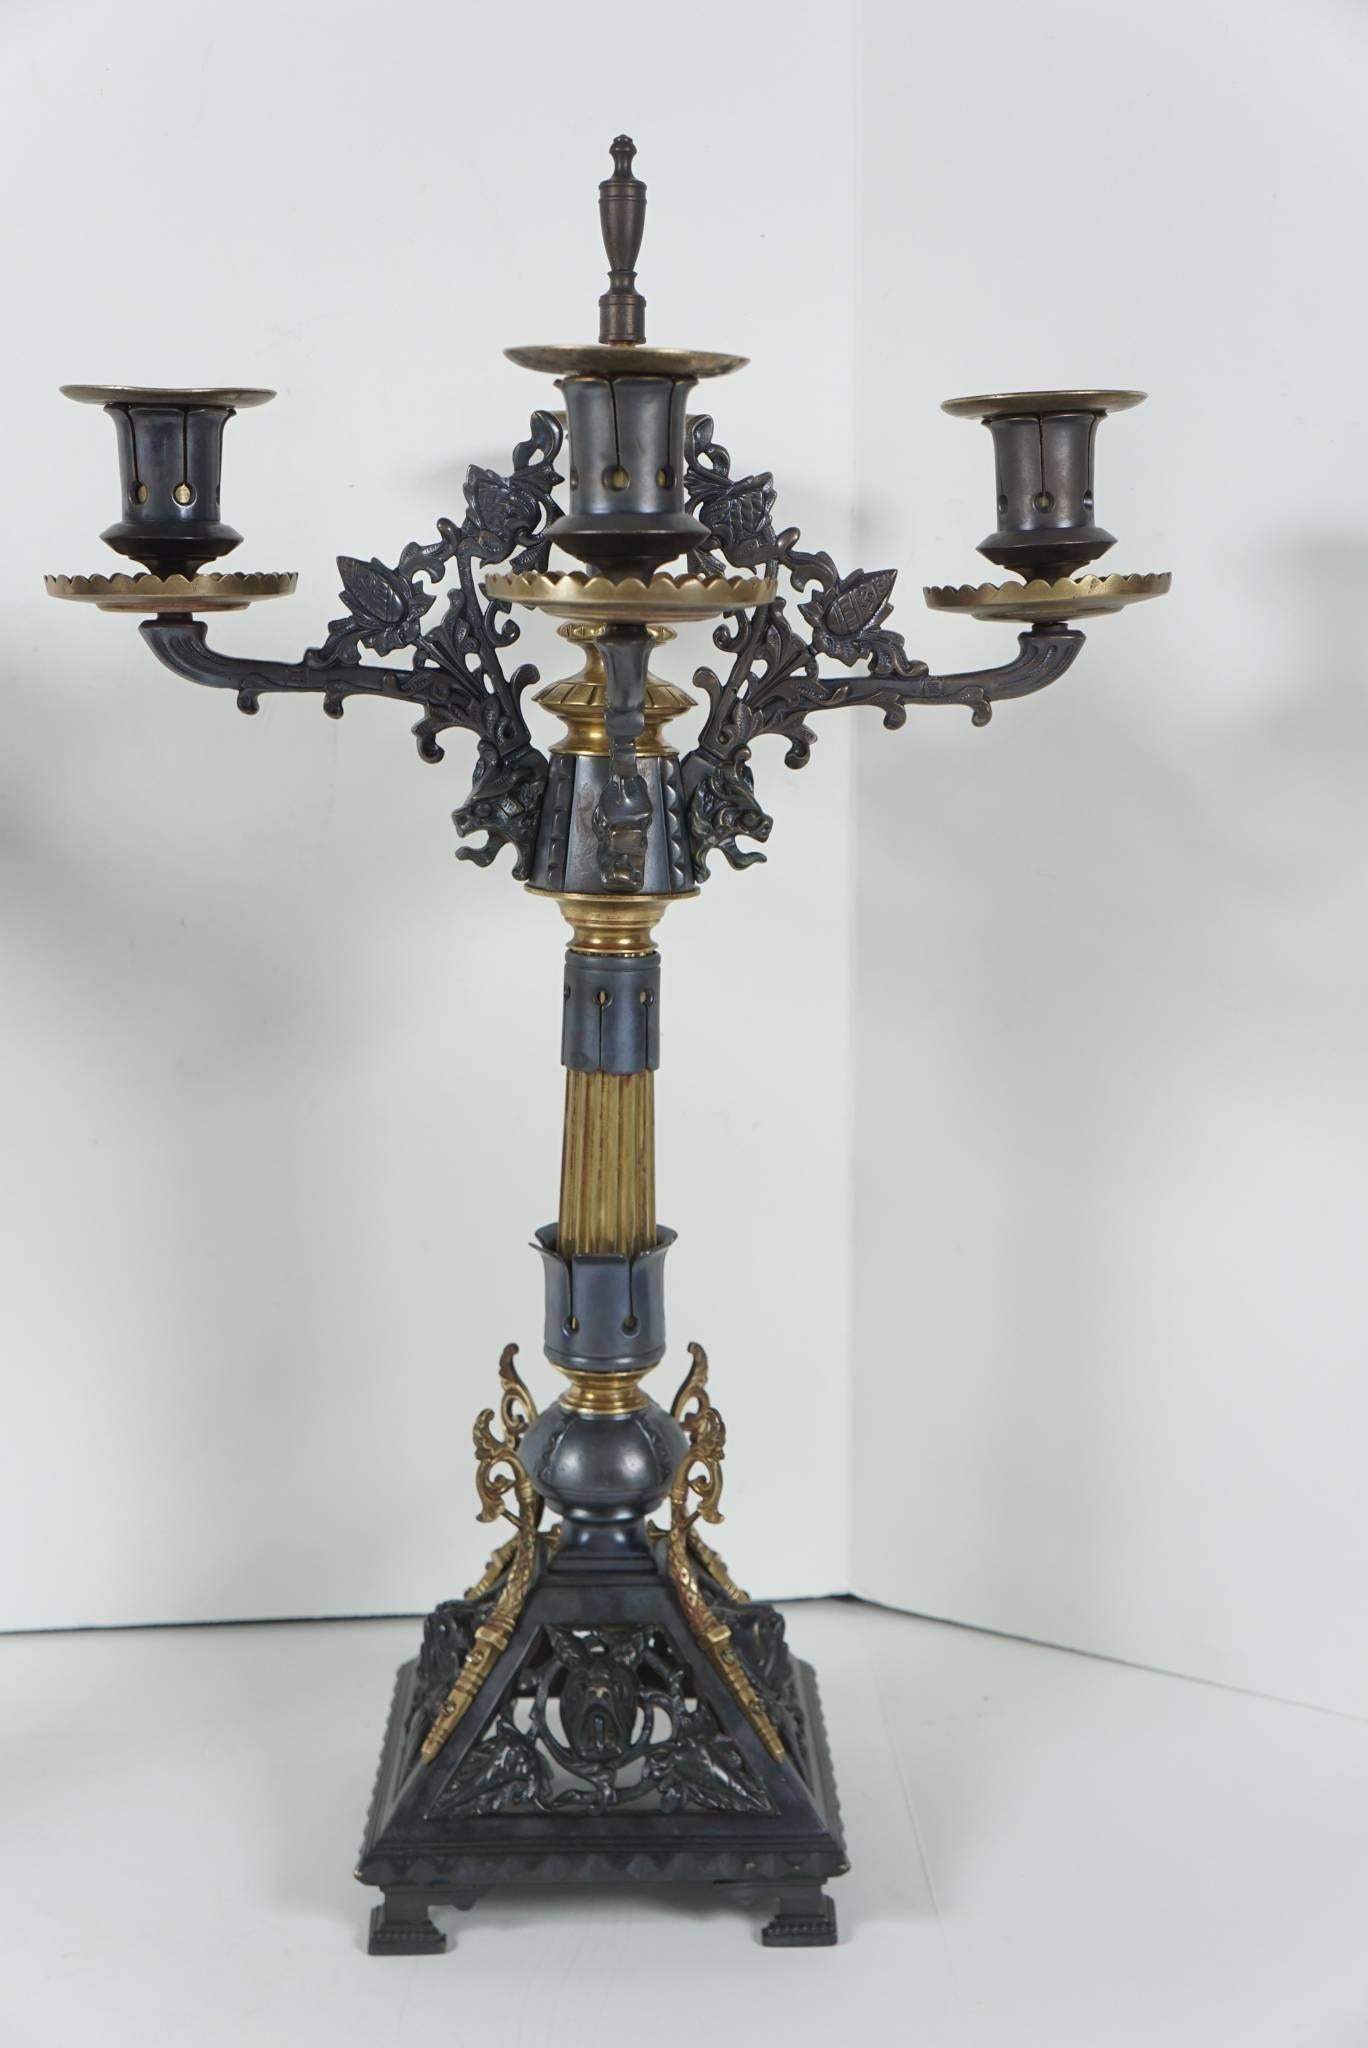 Cast Pair of Patinated and Polished Bronze Renaissance Revival Candelabra For Sale